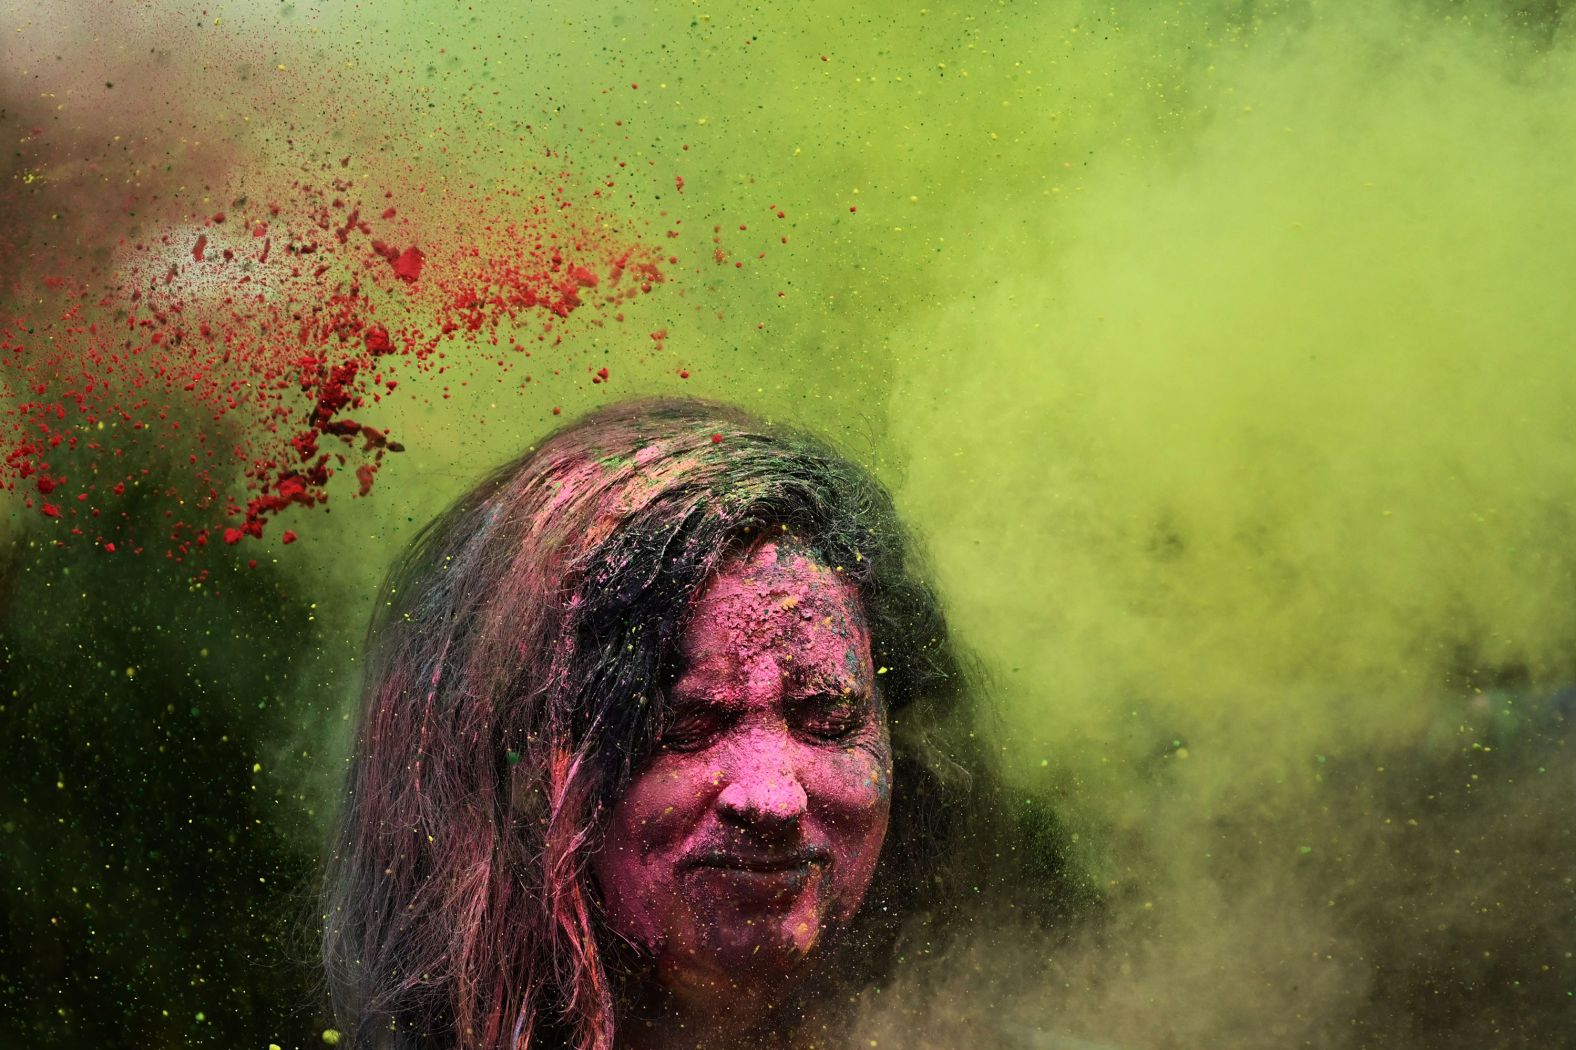 A <a href="https://www.cnn.com/2023/03/07/world/holi-2023-celebration-photos-cec/index.html" target="_blank">Holi reveler</a> is showered with colored powder during celebrations in Mumbai, India, on Tuesday, March 7.